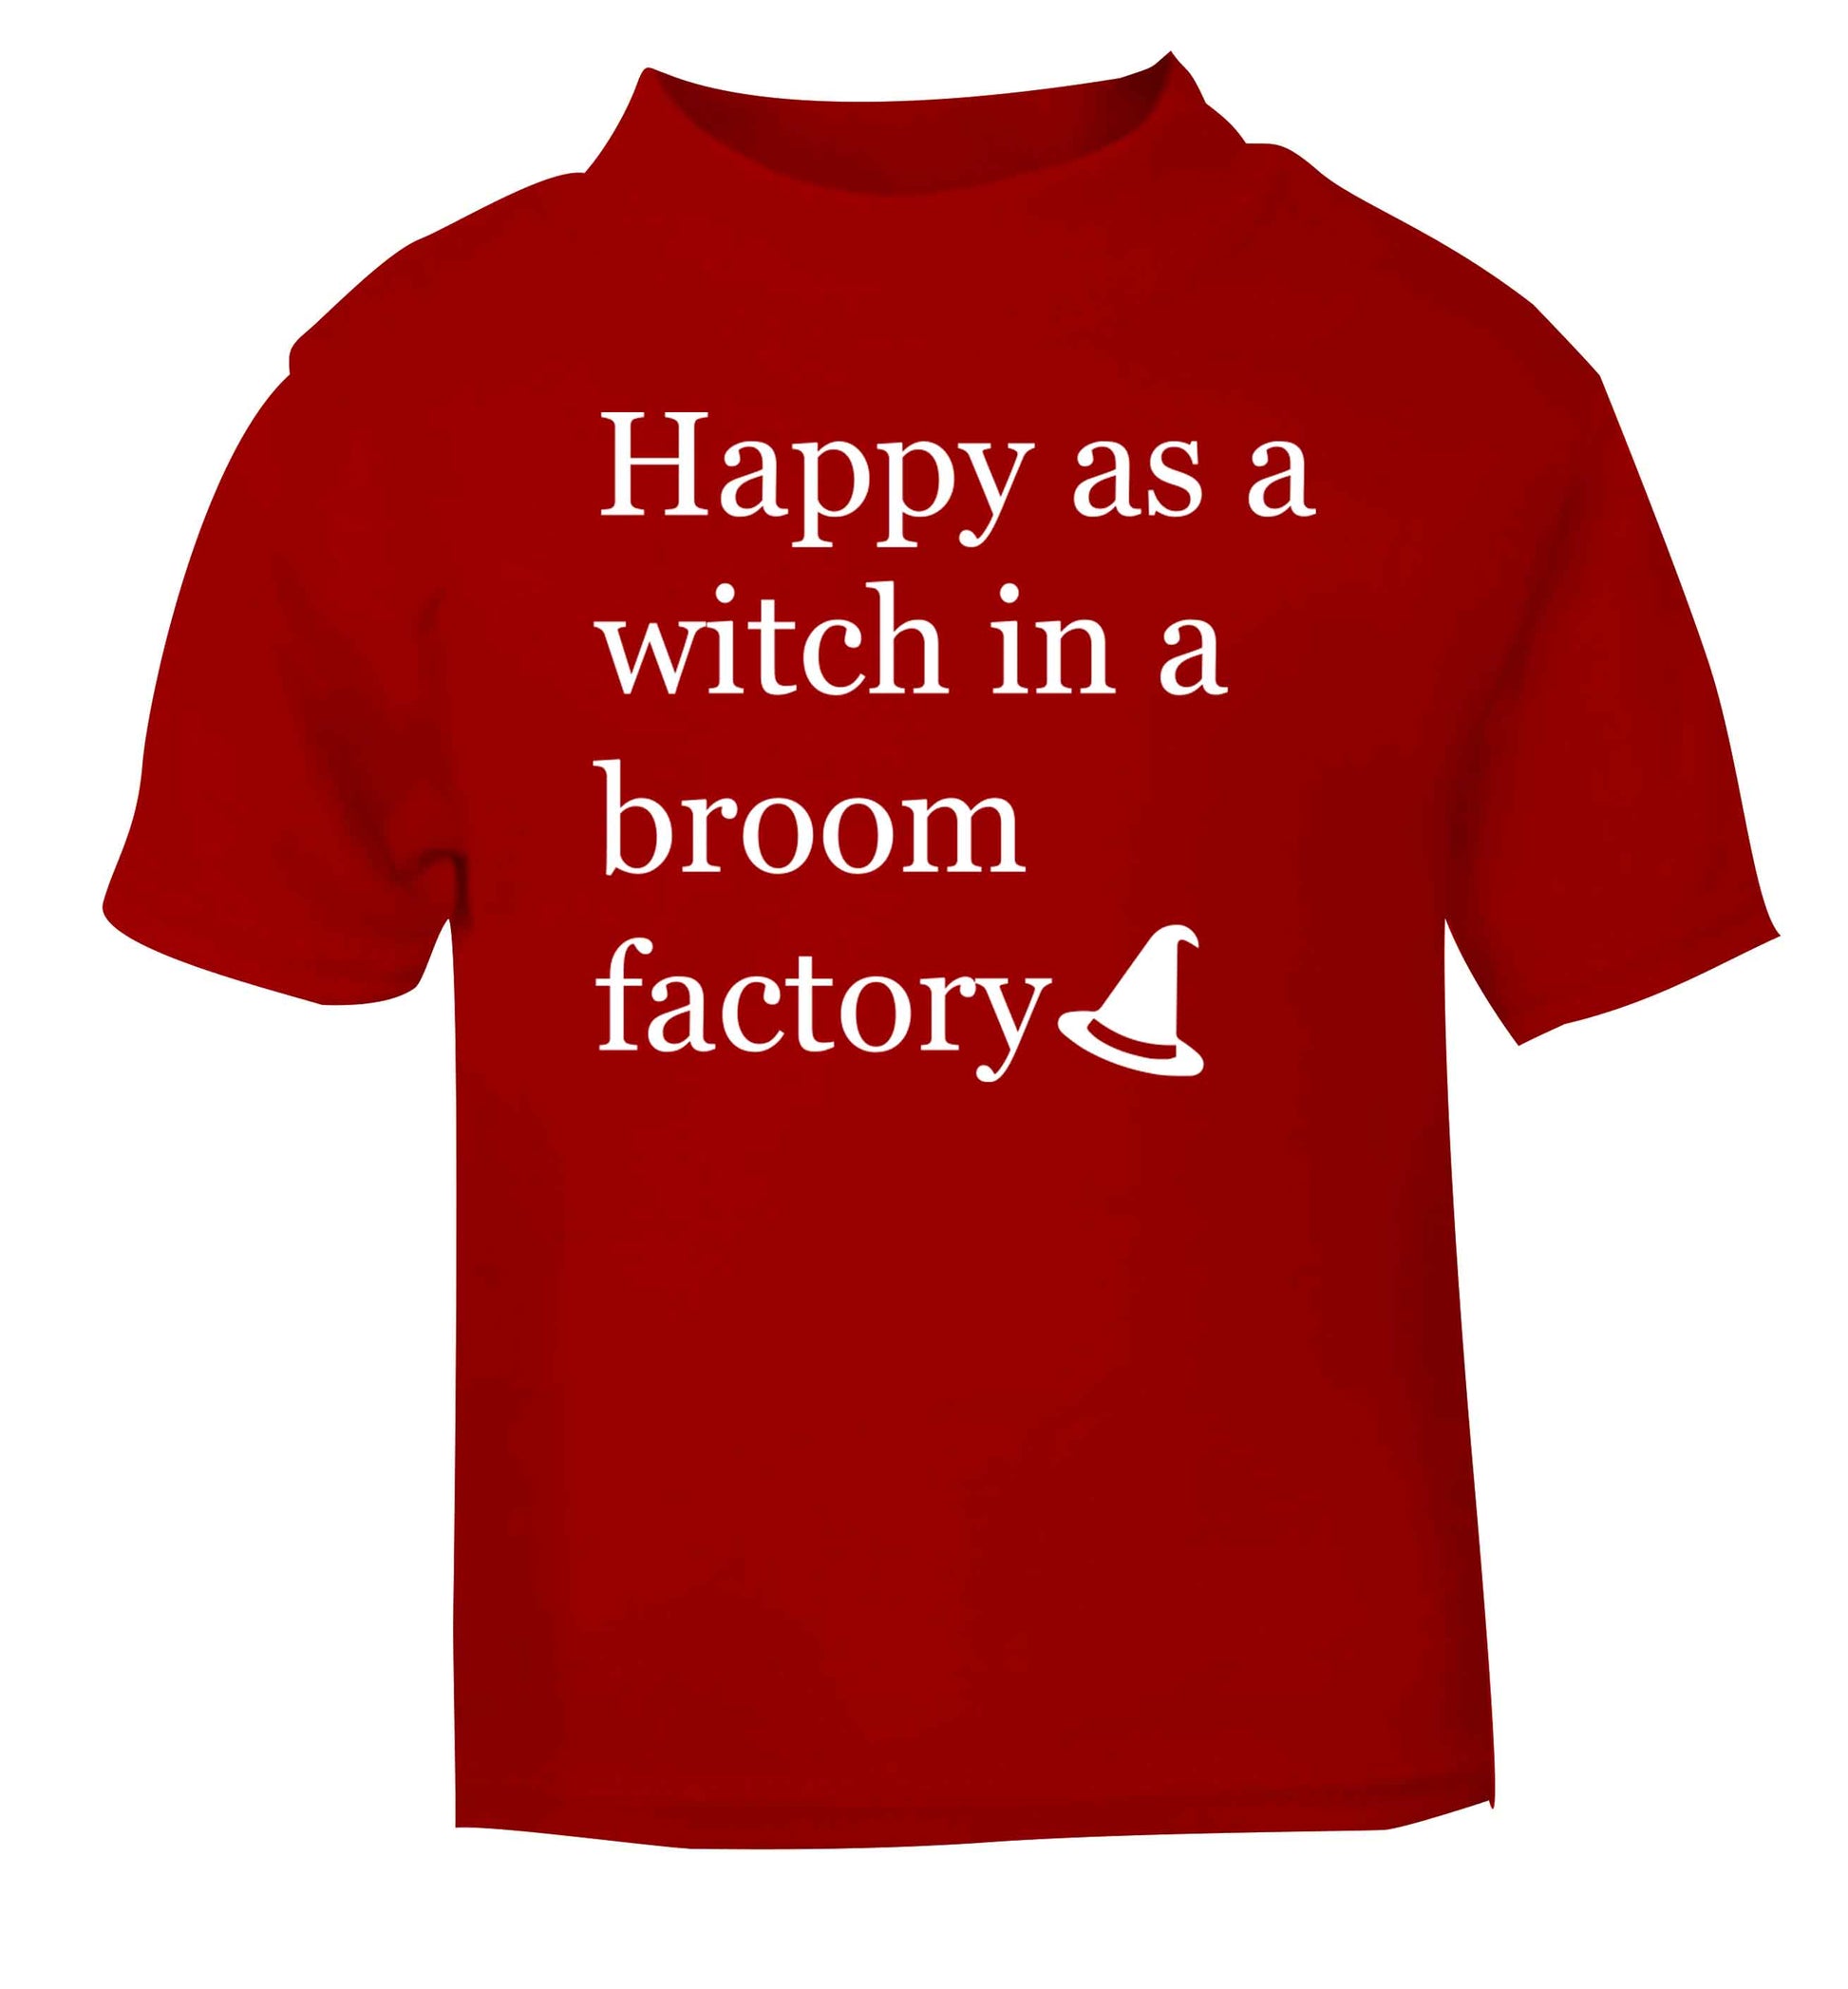 Happy as a witch in a broom factory red baby toddler Tshirt 2 Years